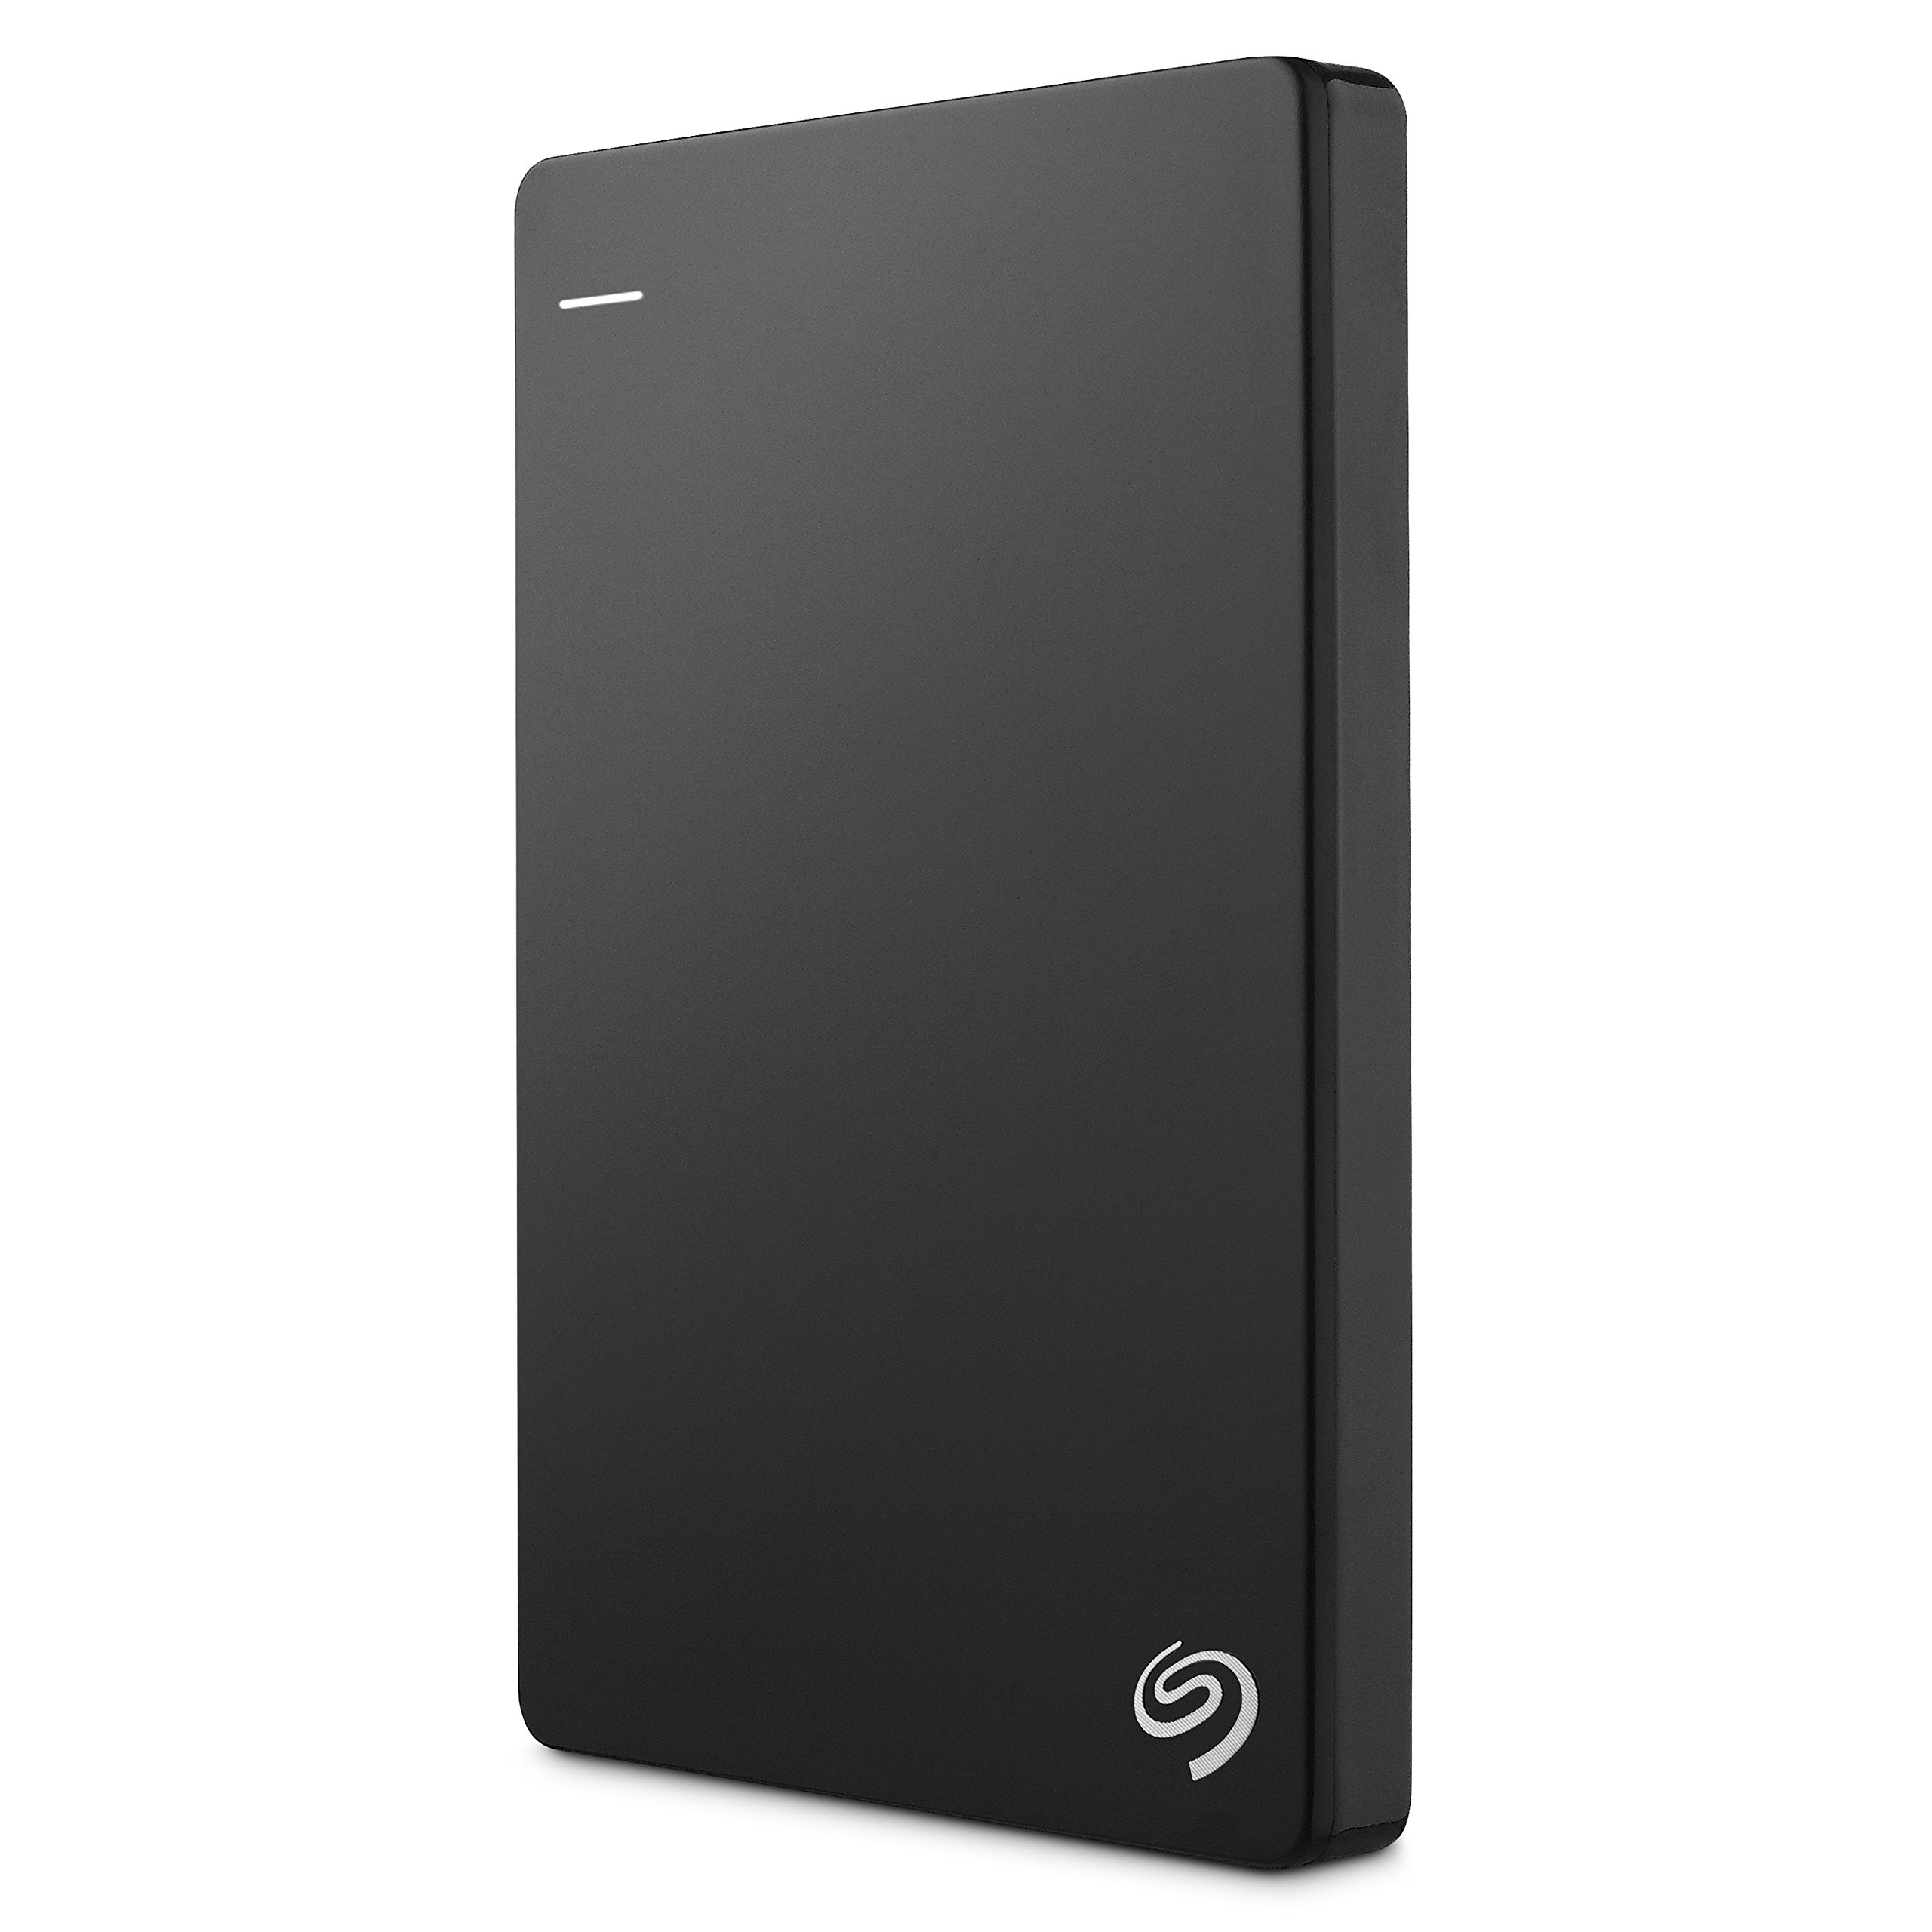 Book Cover Seagate Backup Plus Slim 2TB External Hard Drive Portable HDD – Black USB 3.0 for PC Laptop and Mac, 2 Months Adobe CC Photography (STDR2000100) 2TB Hard Drive Black